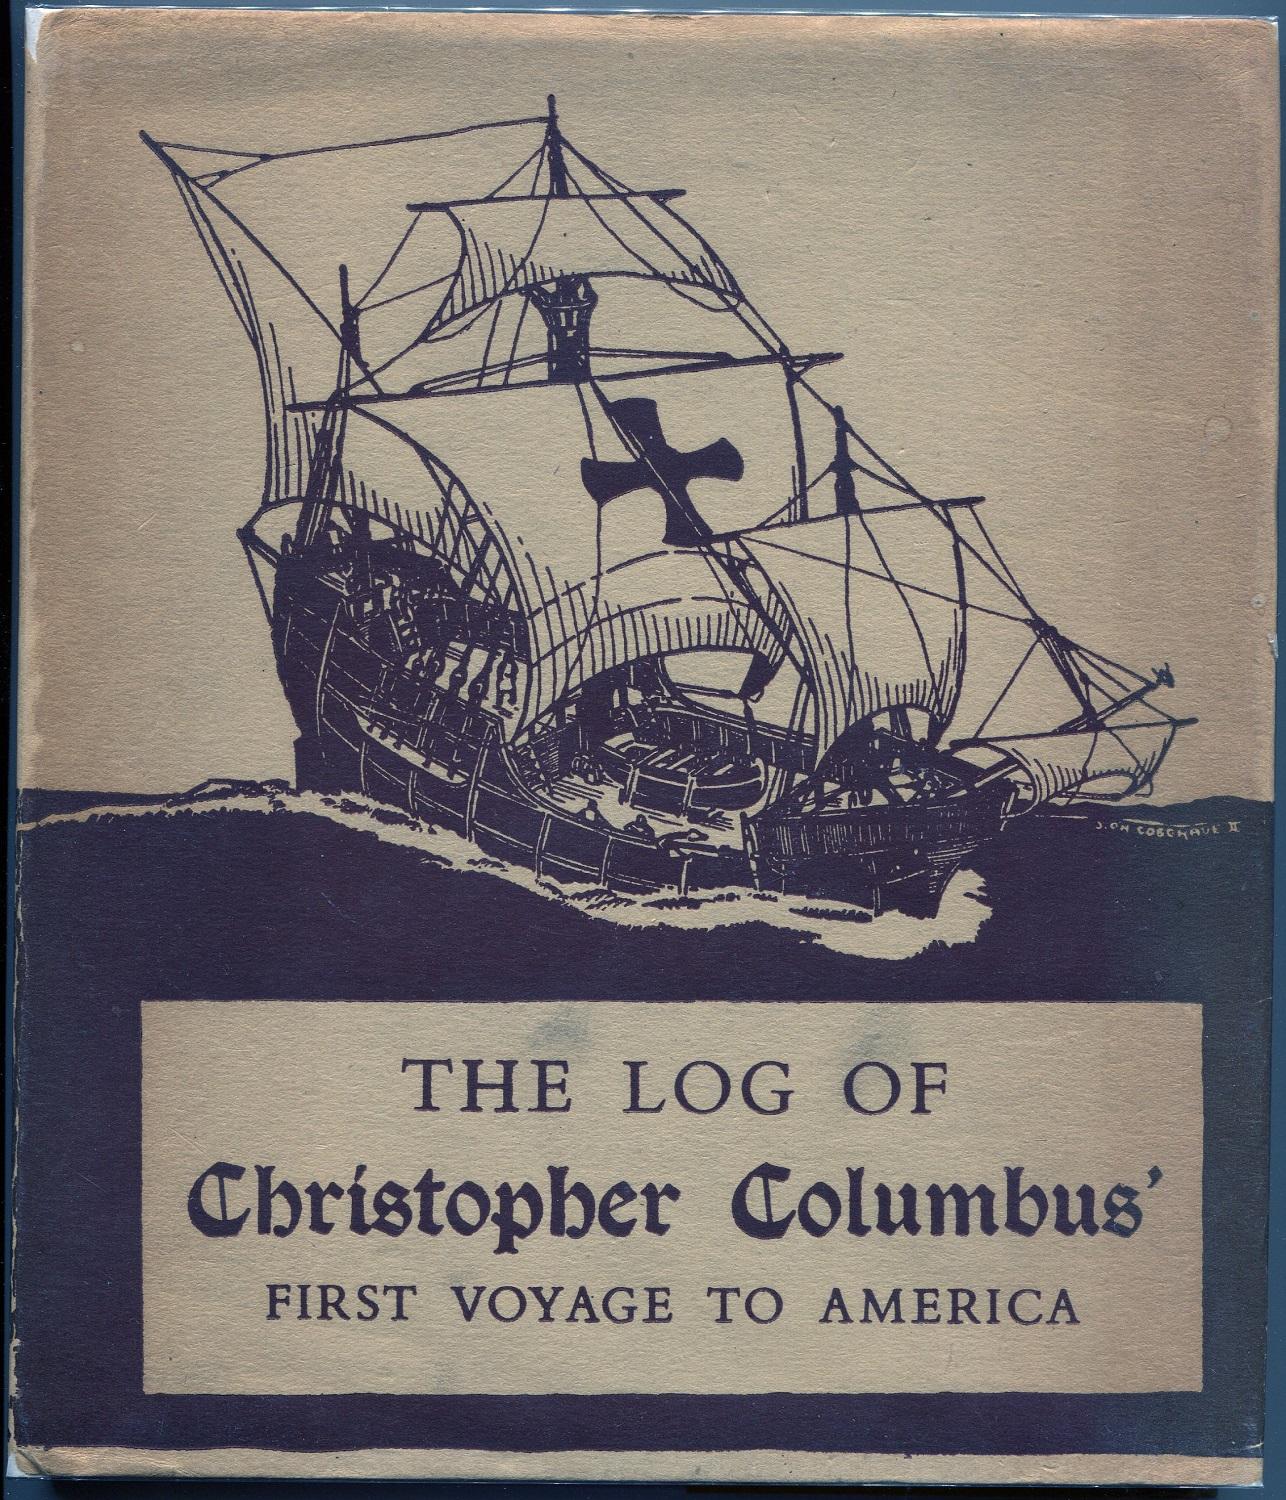 columbus journal of the first voyage to america summary